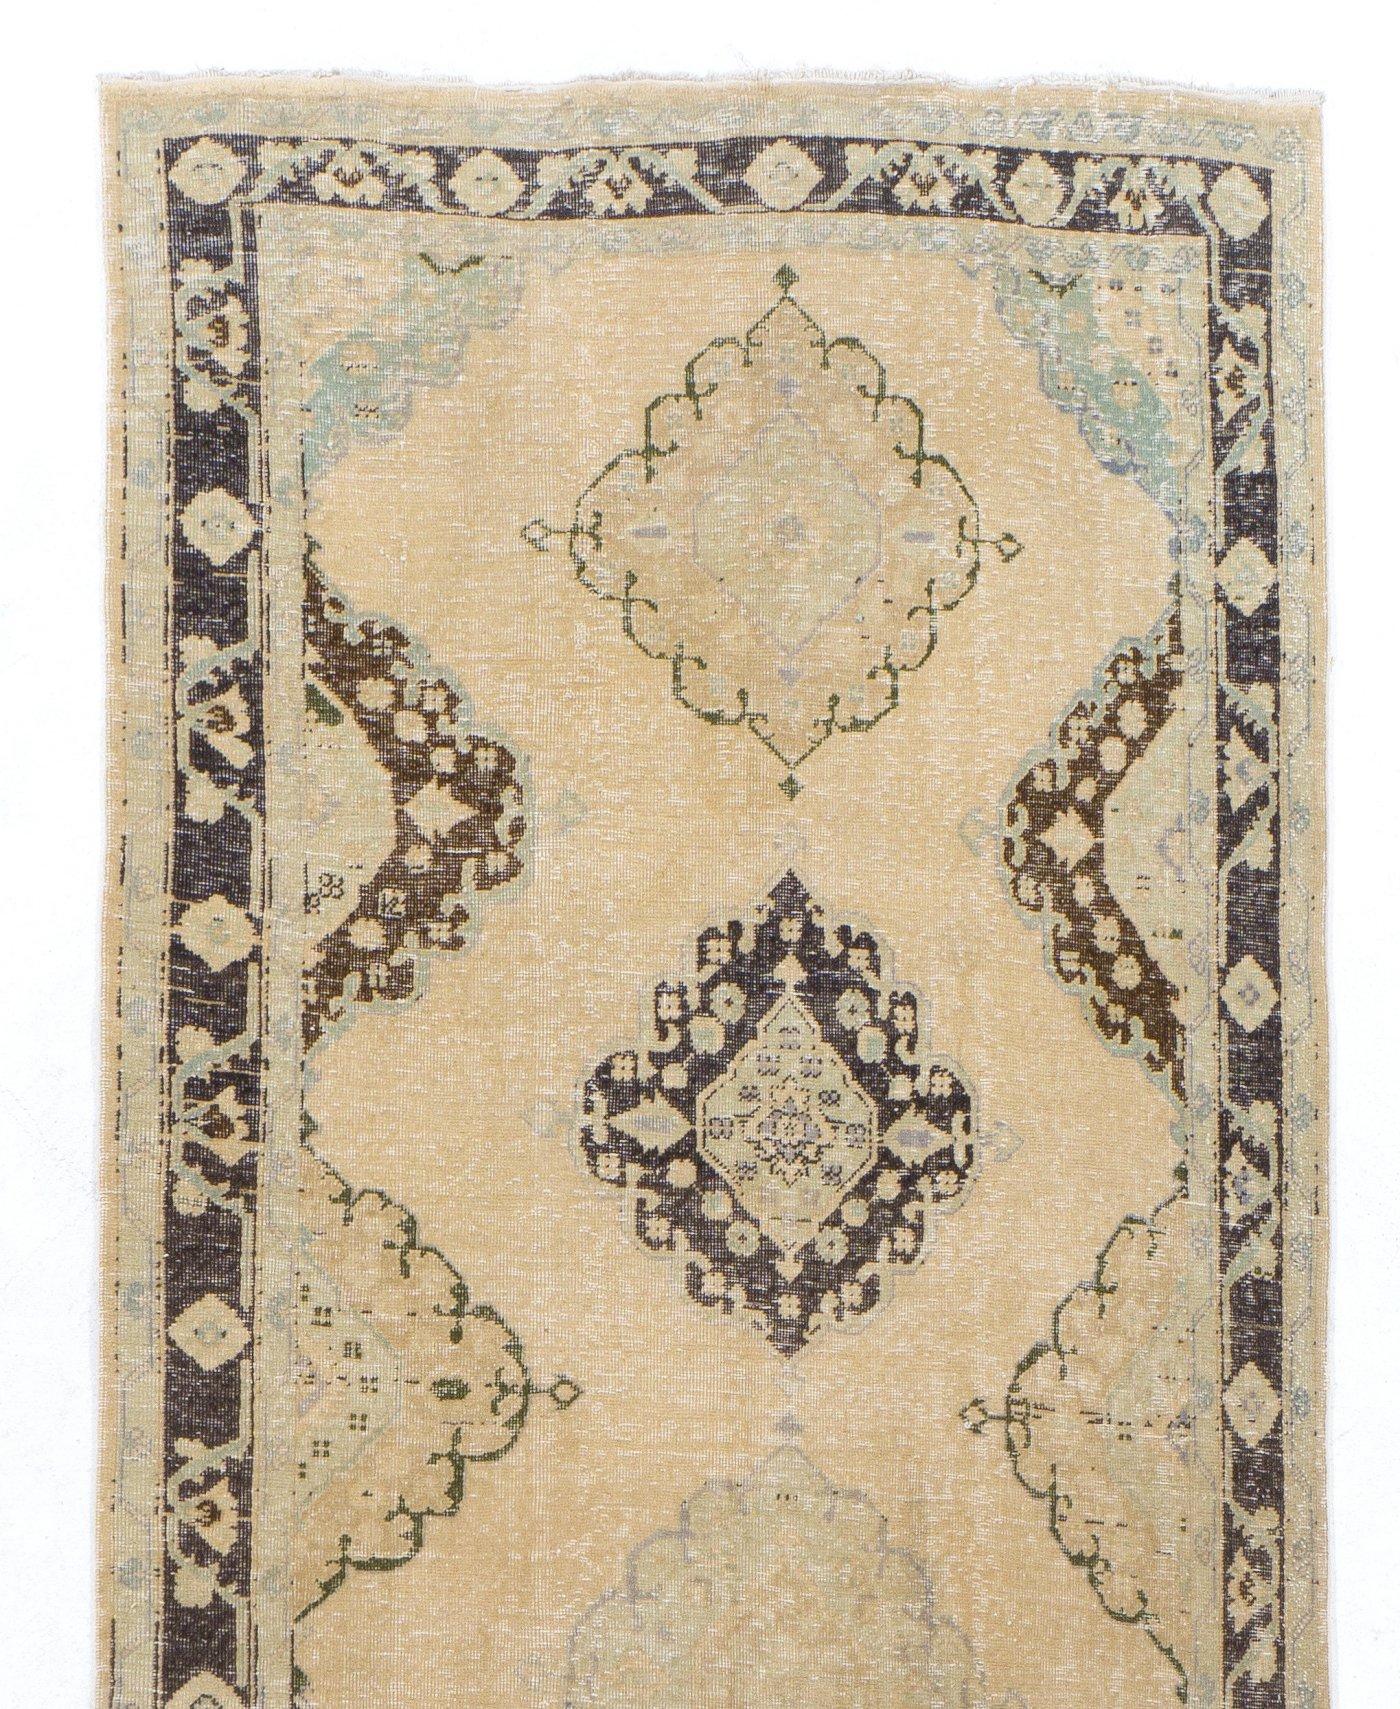 A vintage Turkish runner rug for hallway decor. It was hand-knotted in the 1960s with low wool on cotton foundation and features a multiple medallion design. It is in very good condition, professionally-washed, sturdy and suitable for areas with